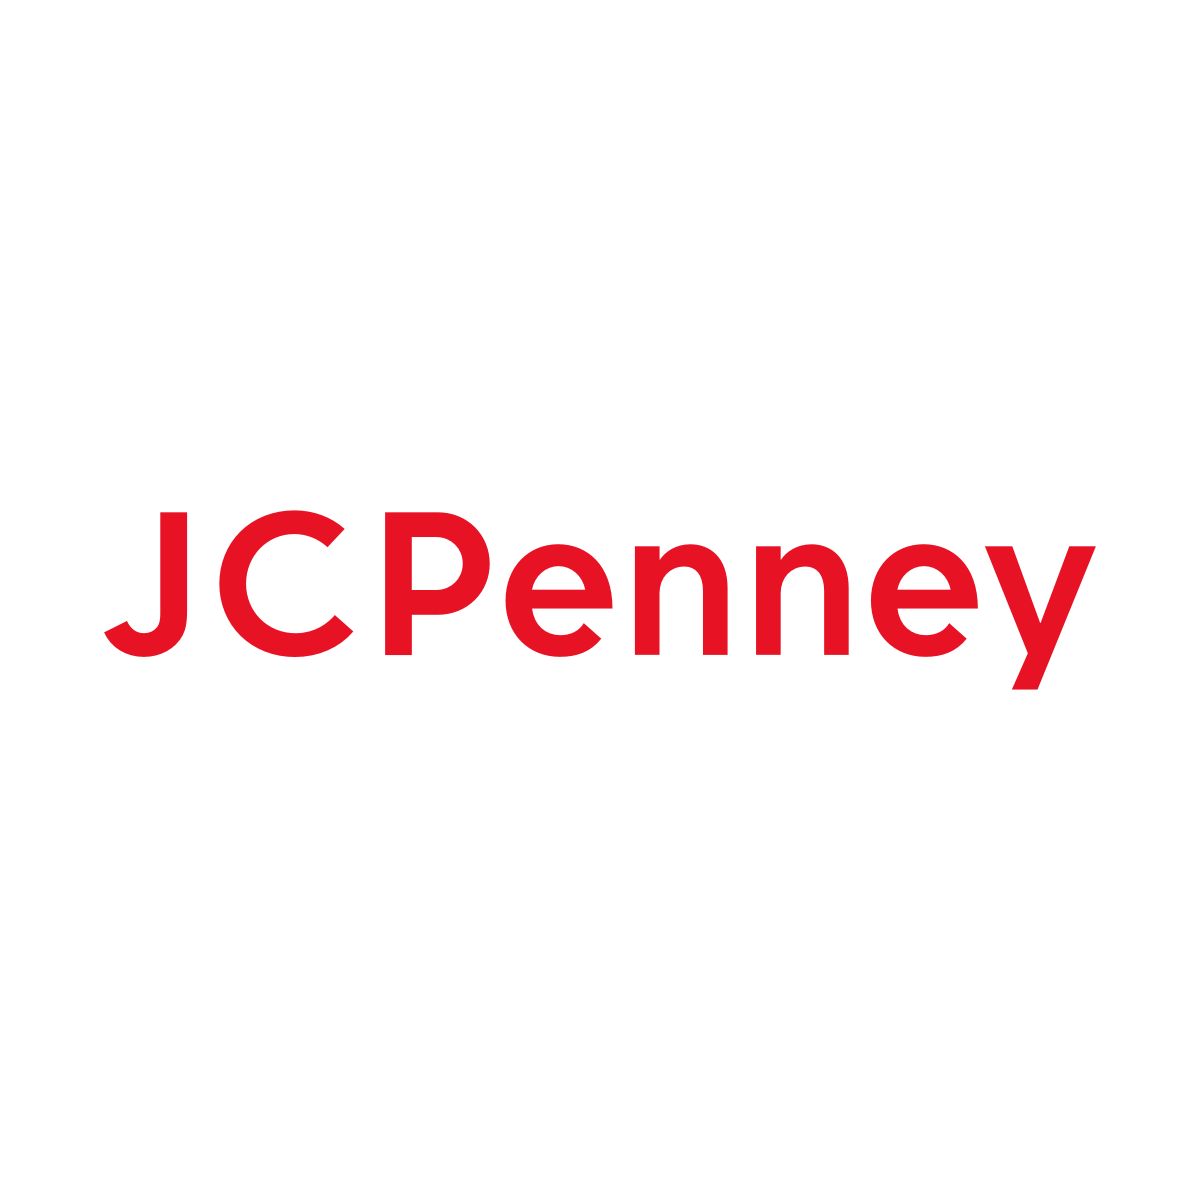 Hair Salon in Champaign, IL | Haircuts & Color | JCPenney